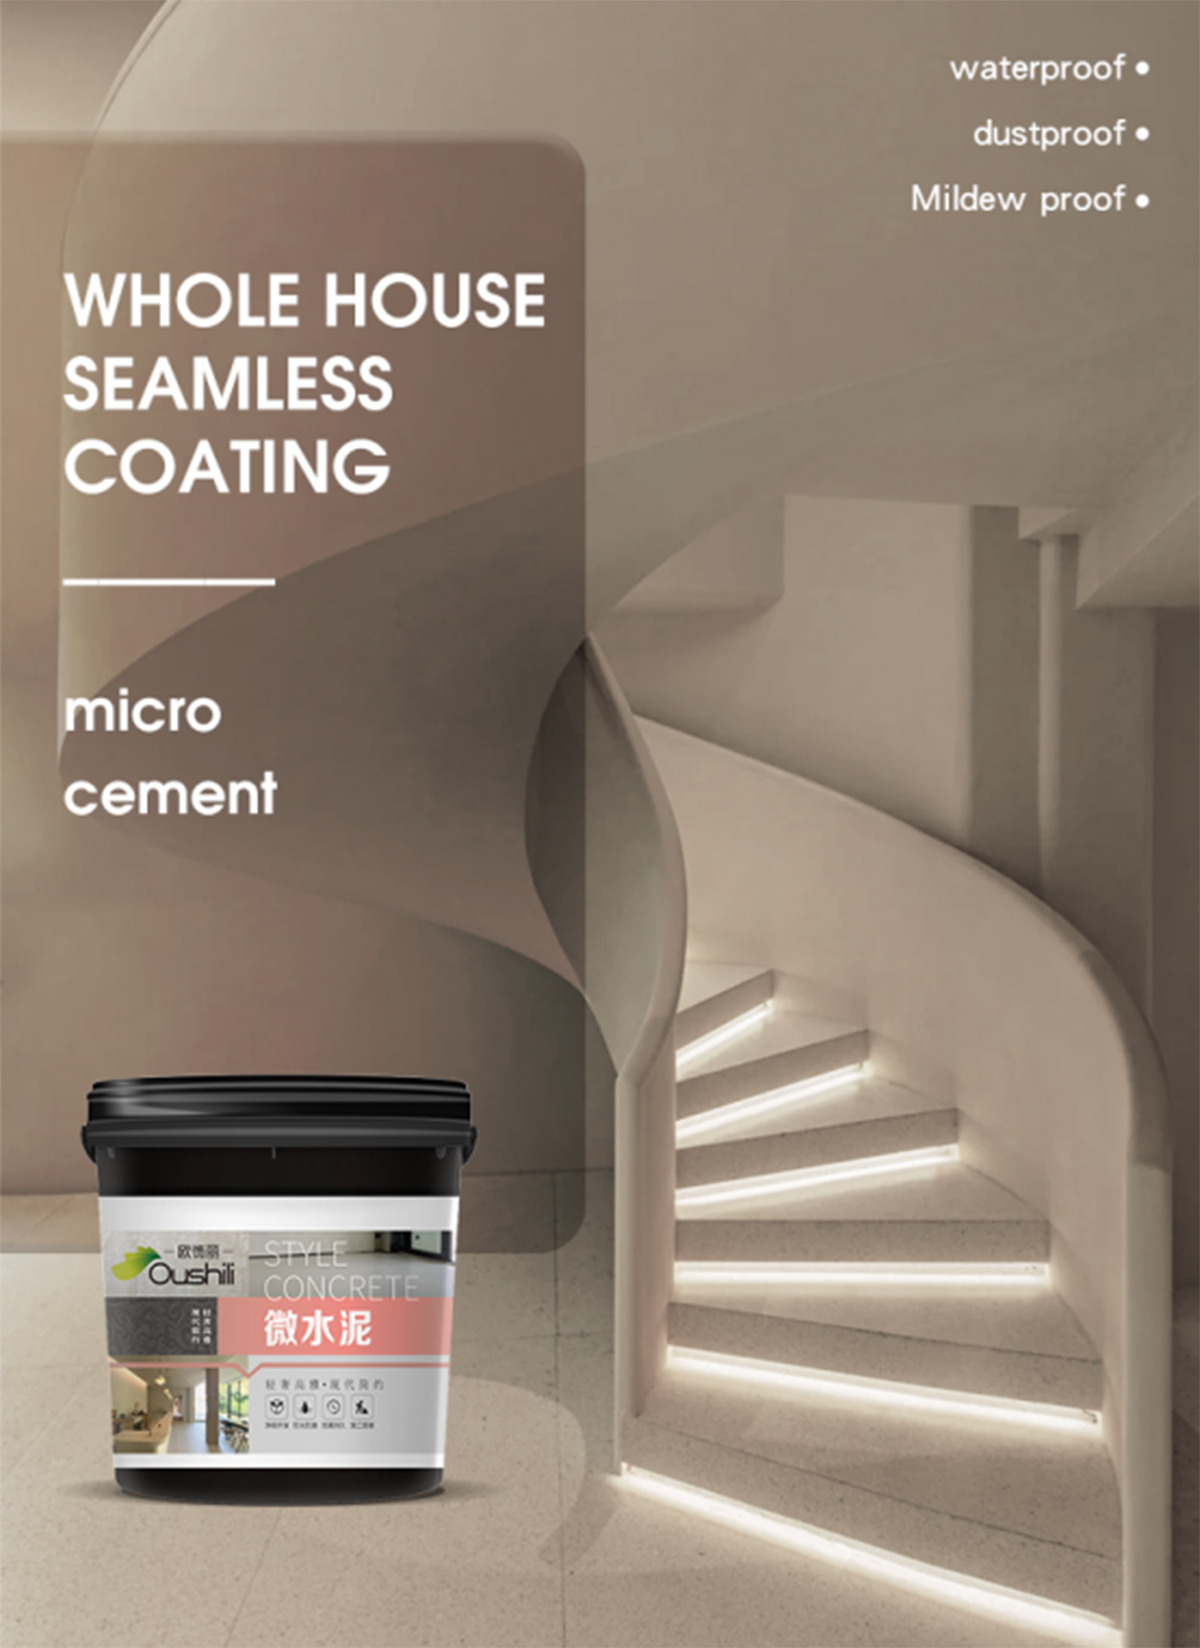 Xinruili-microcement-Waterproofing-- ڪري سگھجي ٿو-ديوار-يا-فرش-4- تي لاڳو